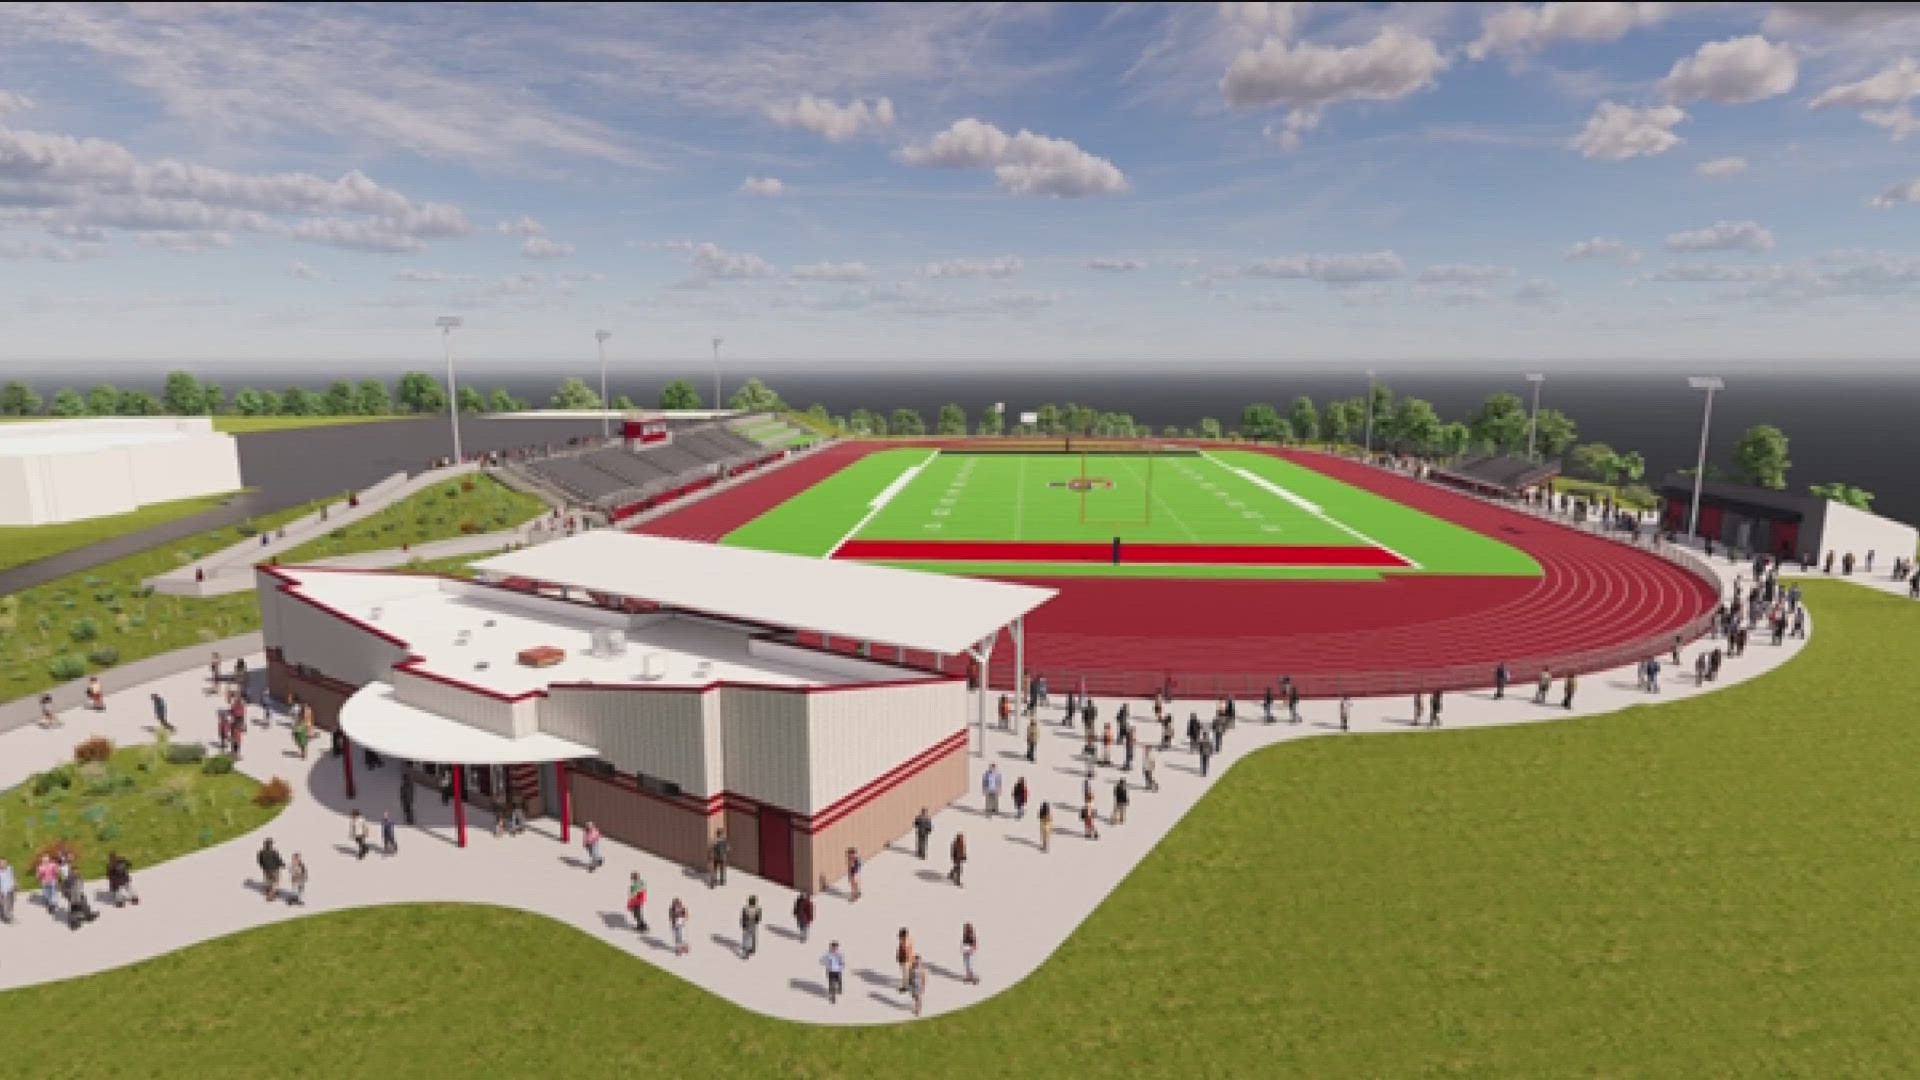 The Sweetwater Union High School District announced they will break ground on a state-of-the-art football stadium complex in June 2024.